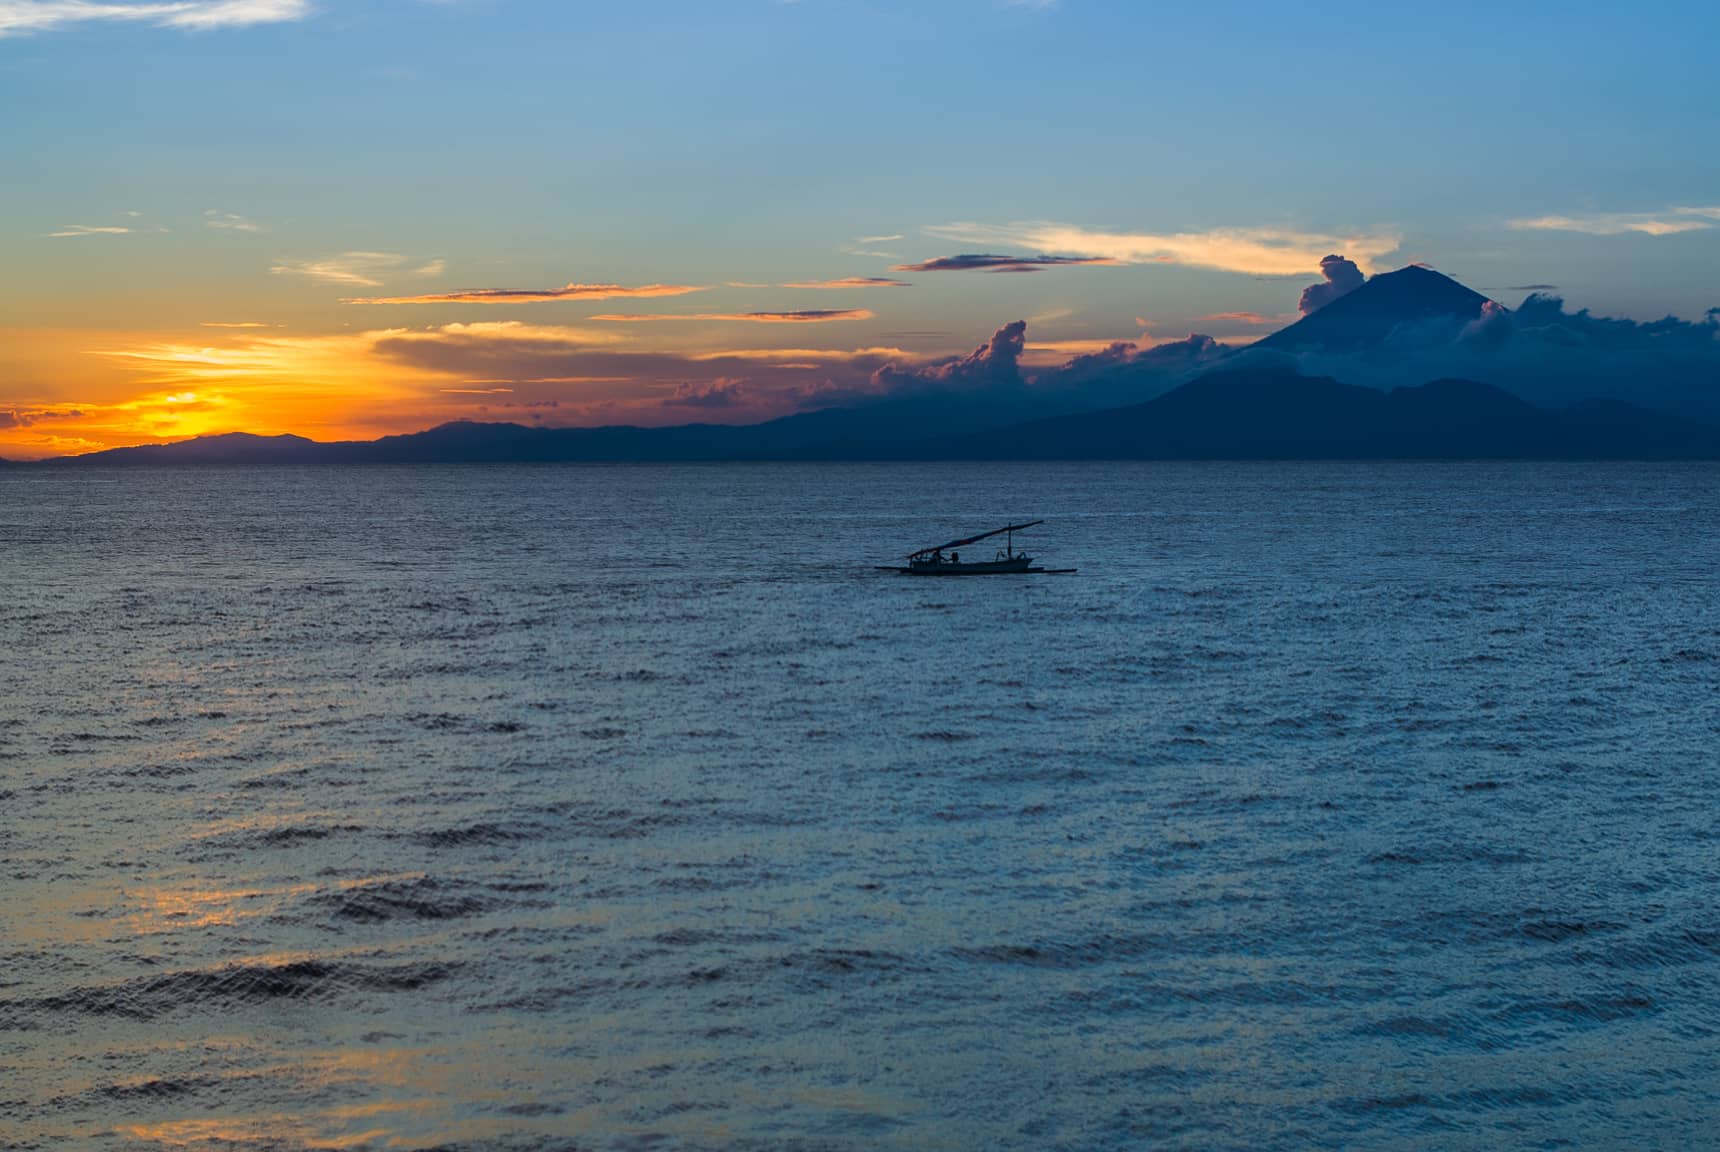 Professional photos of sunsets in Bali Indonesia - Bali from Lombok